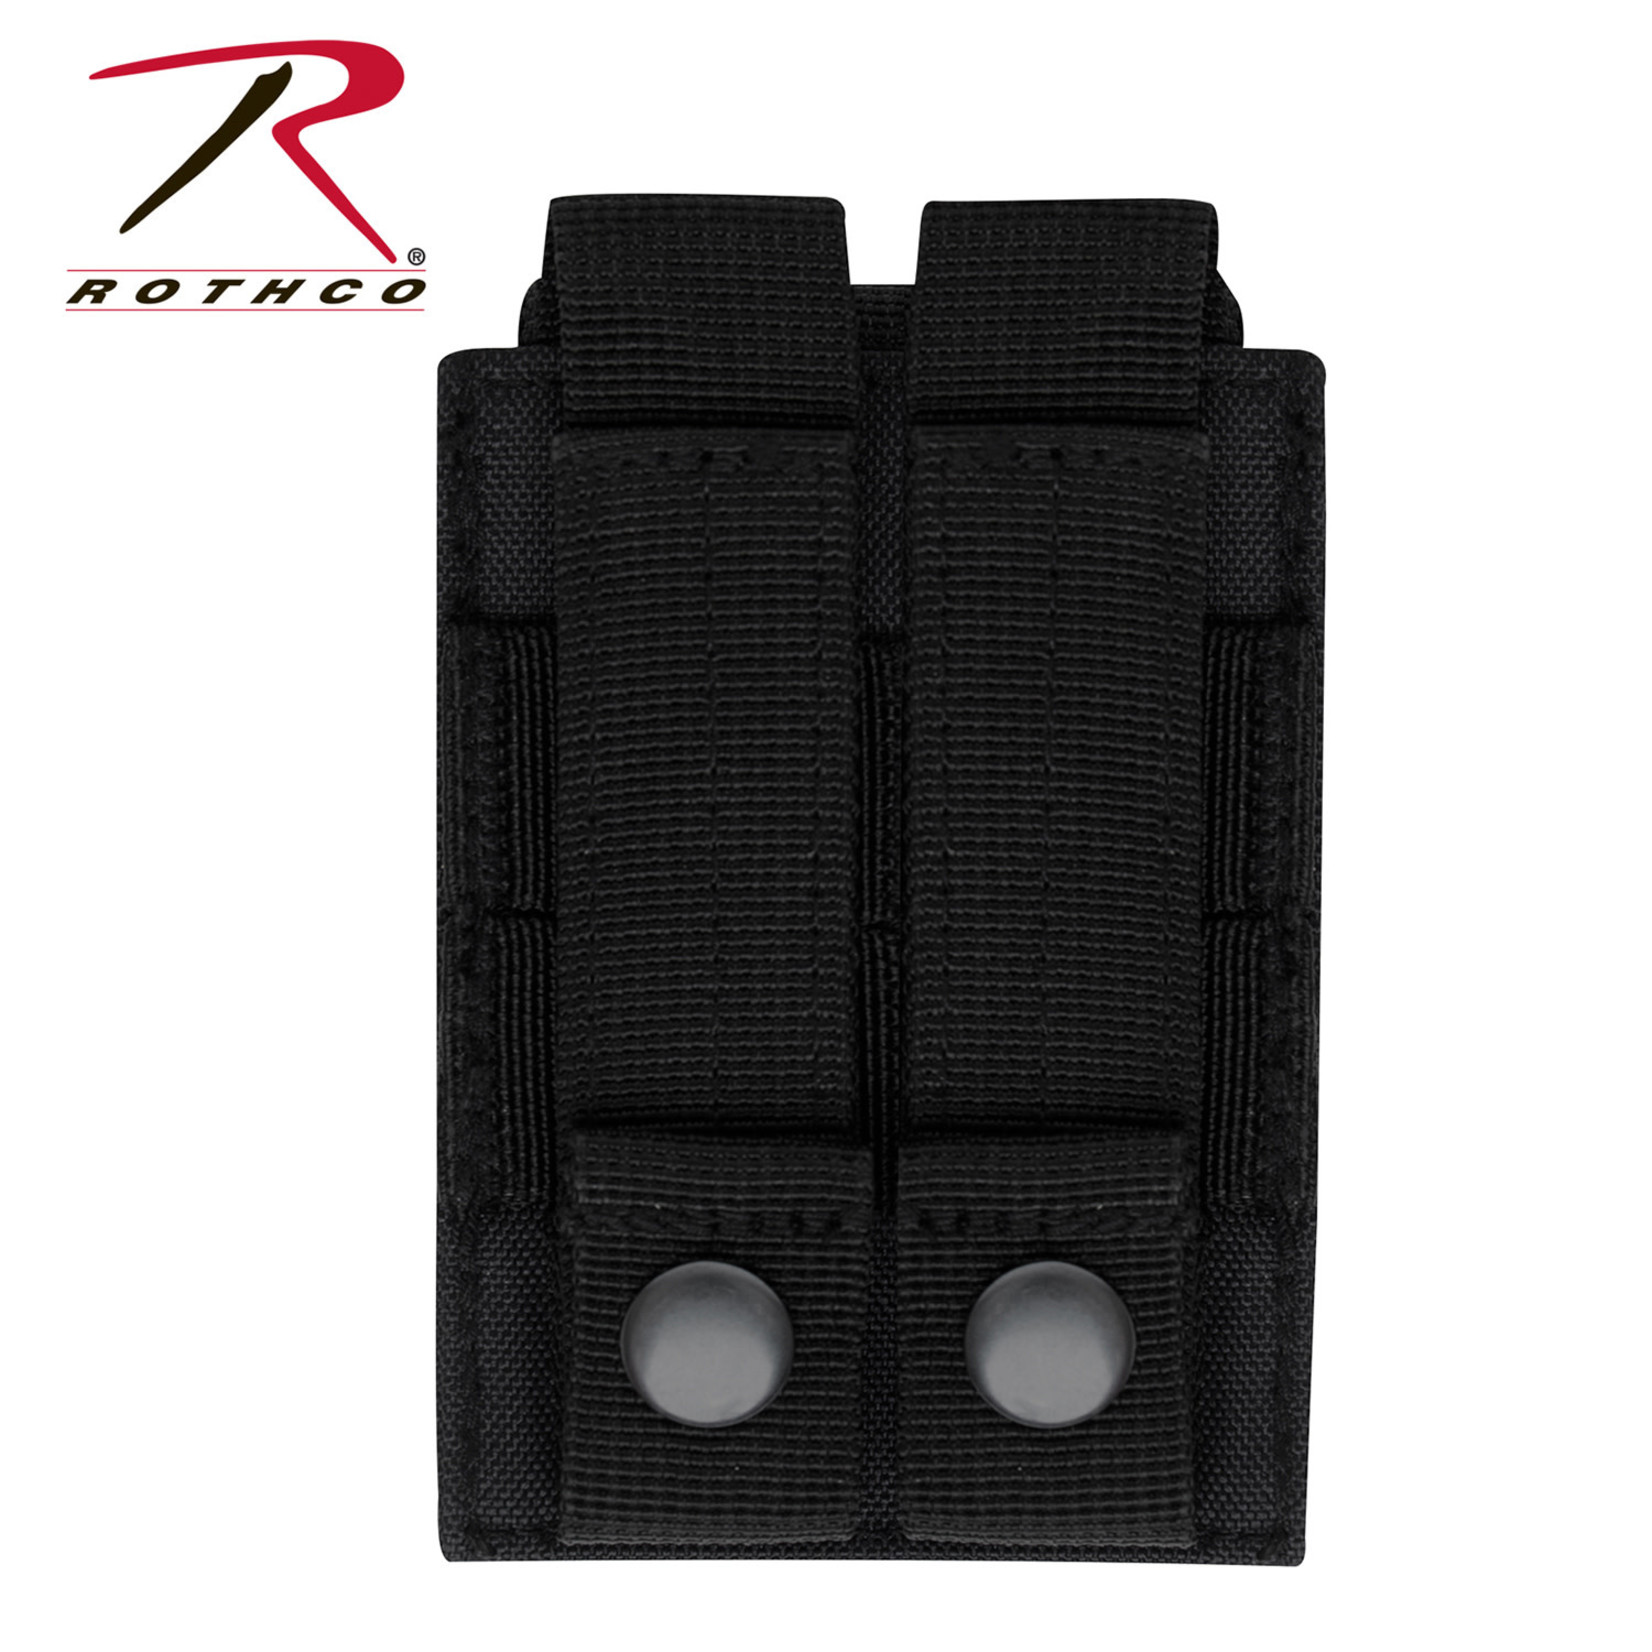 Rothco Rothco MOLLE Easy Access Glove Pouch